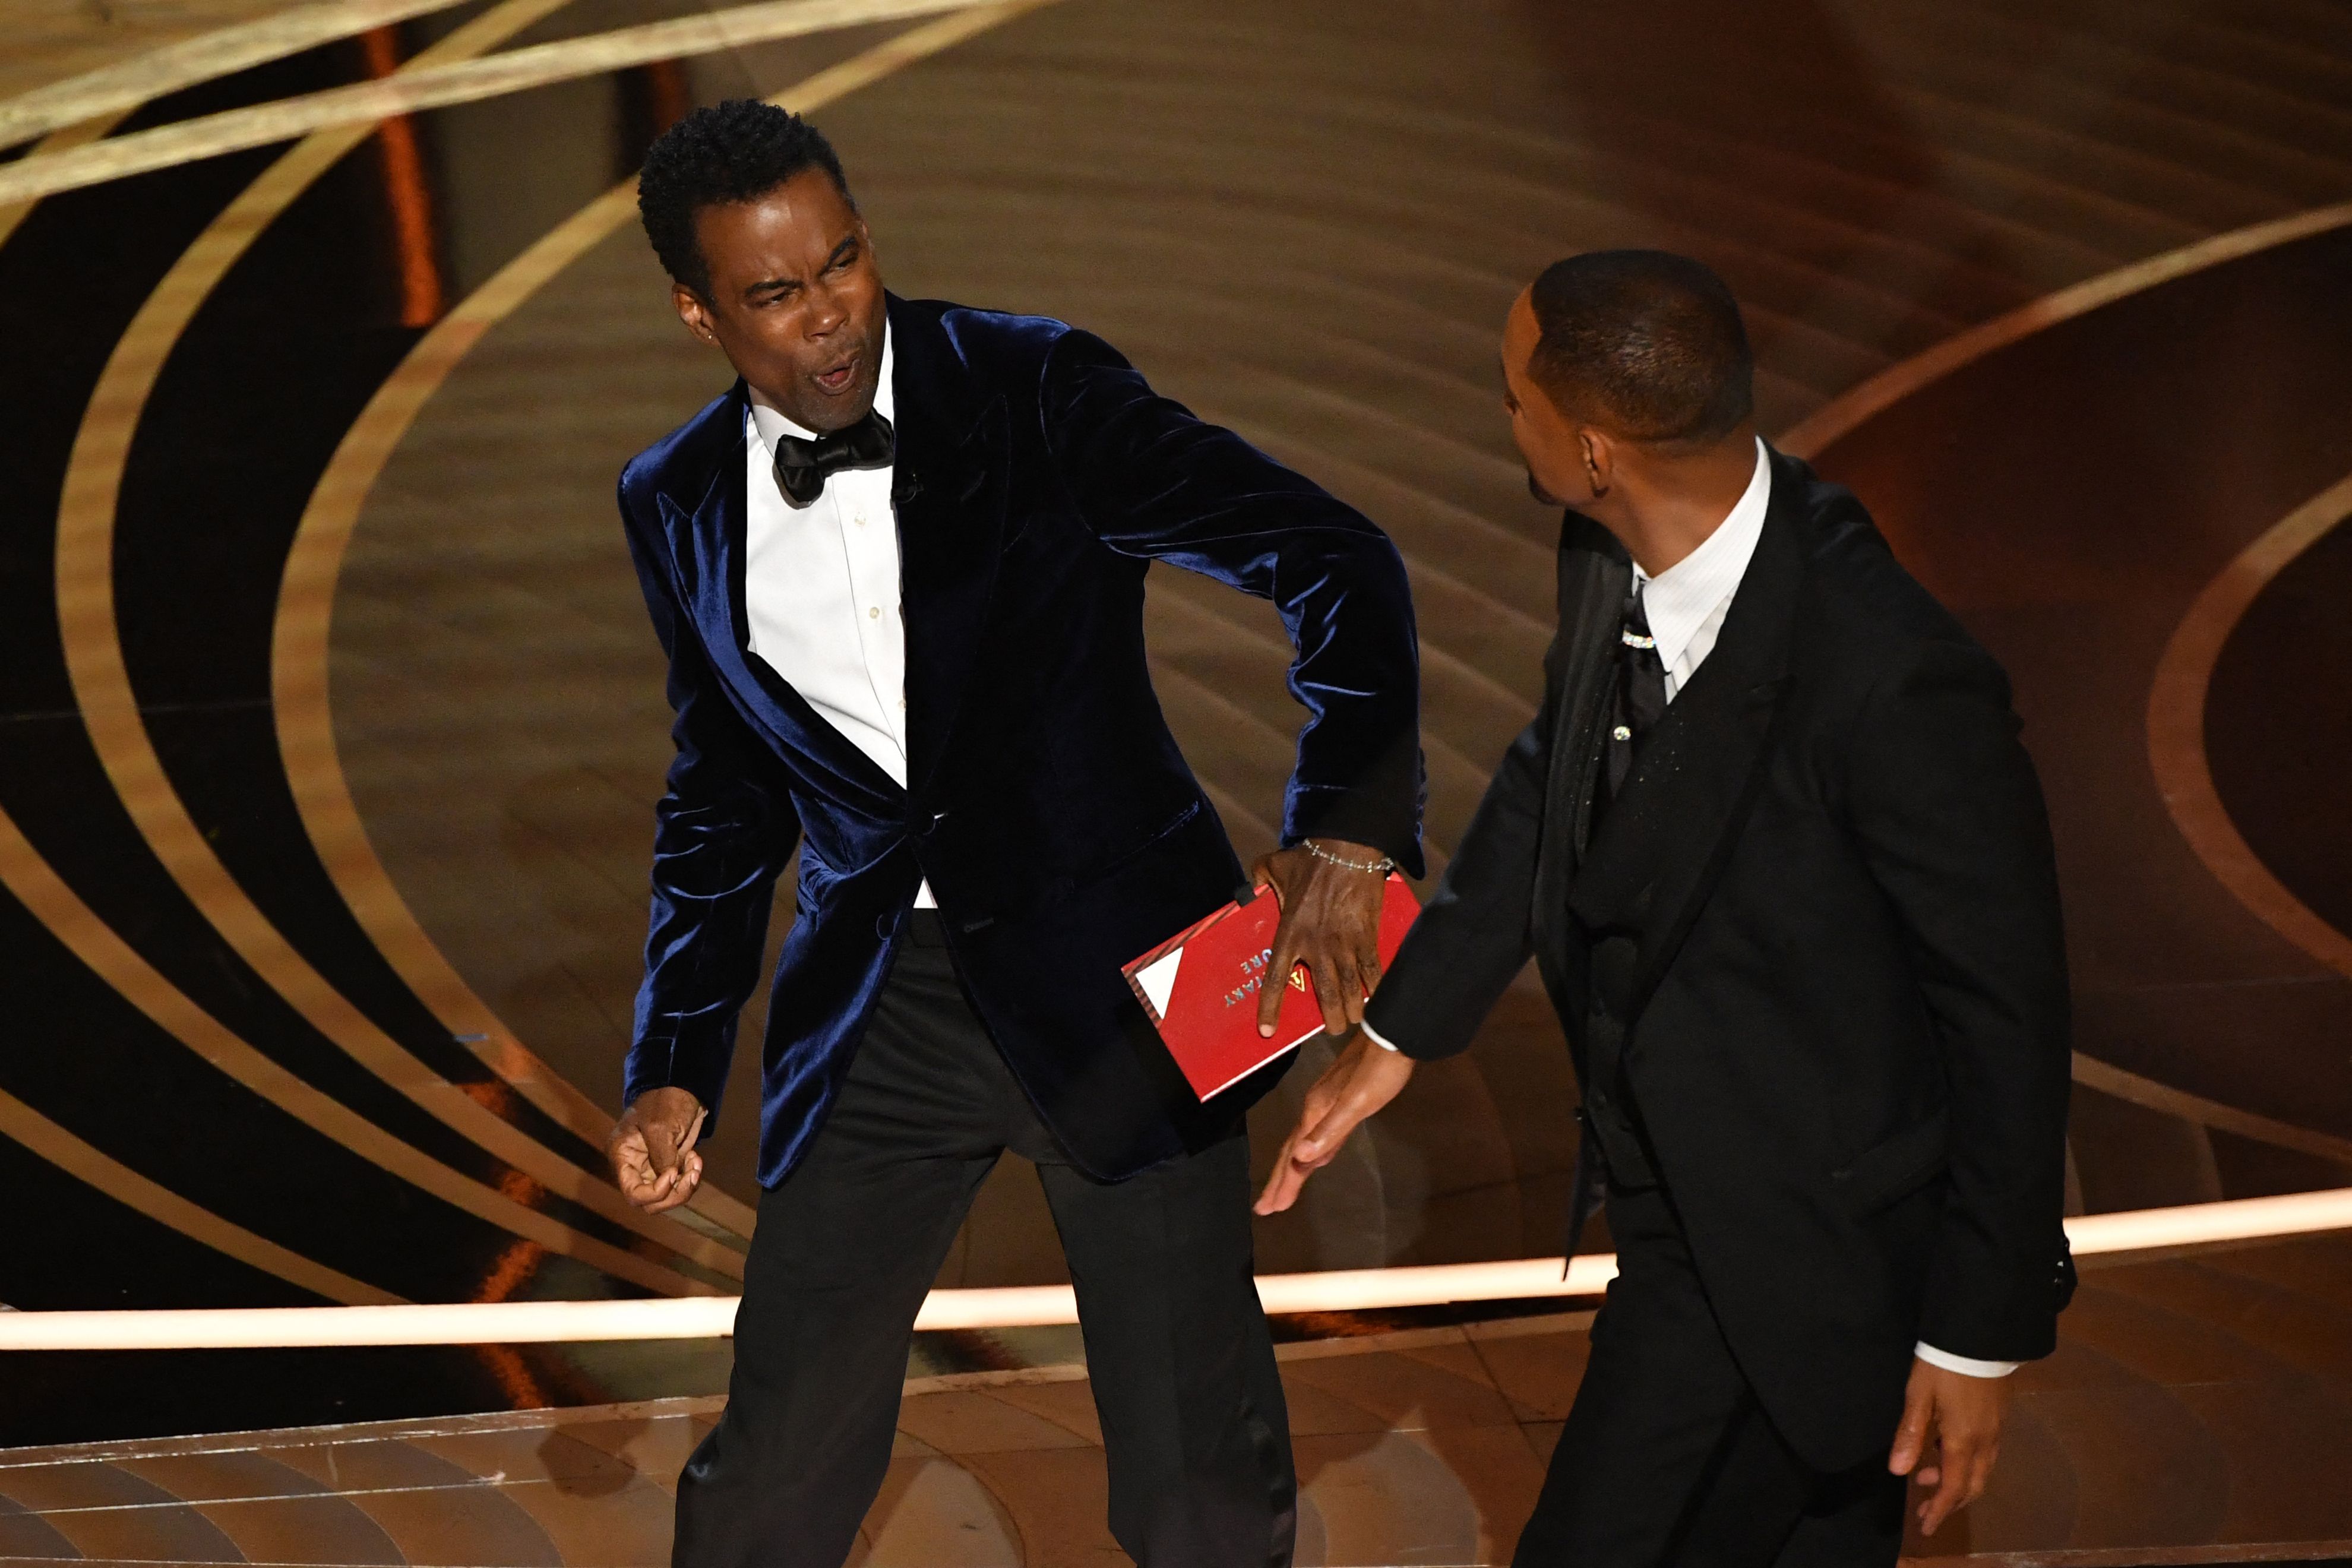 Will Smith slaps Chris Rock during the Academy Awards